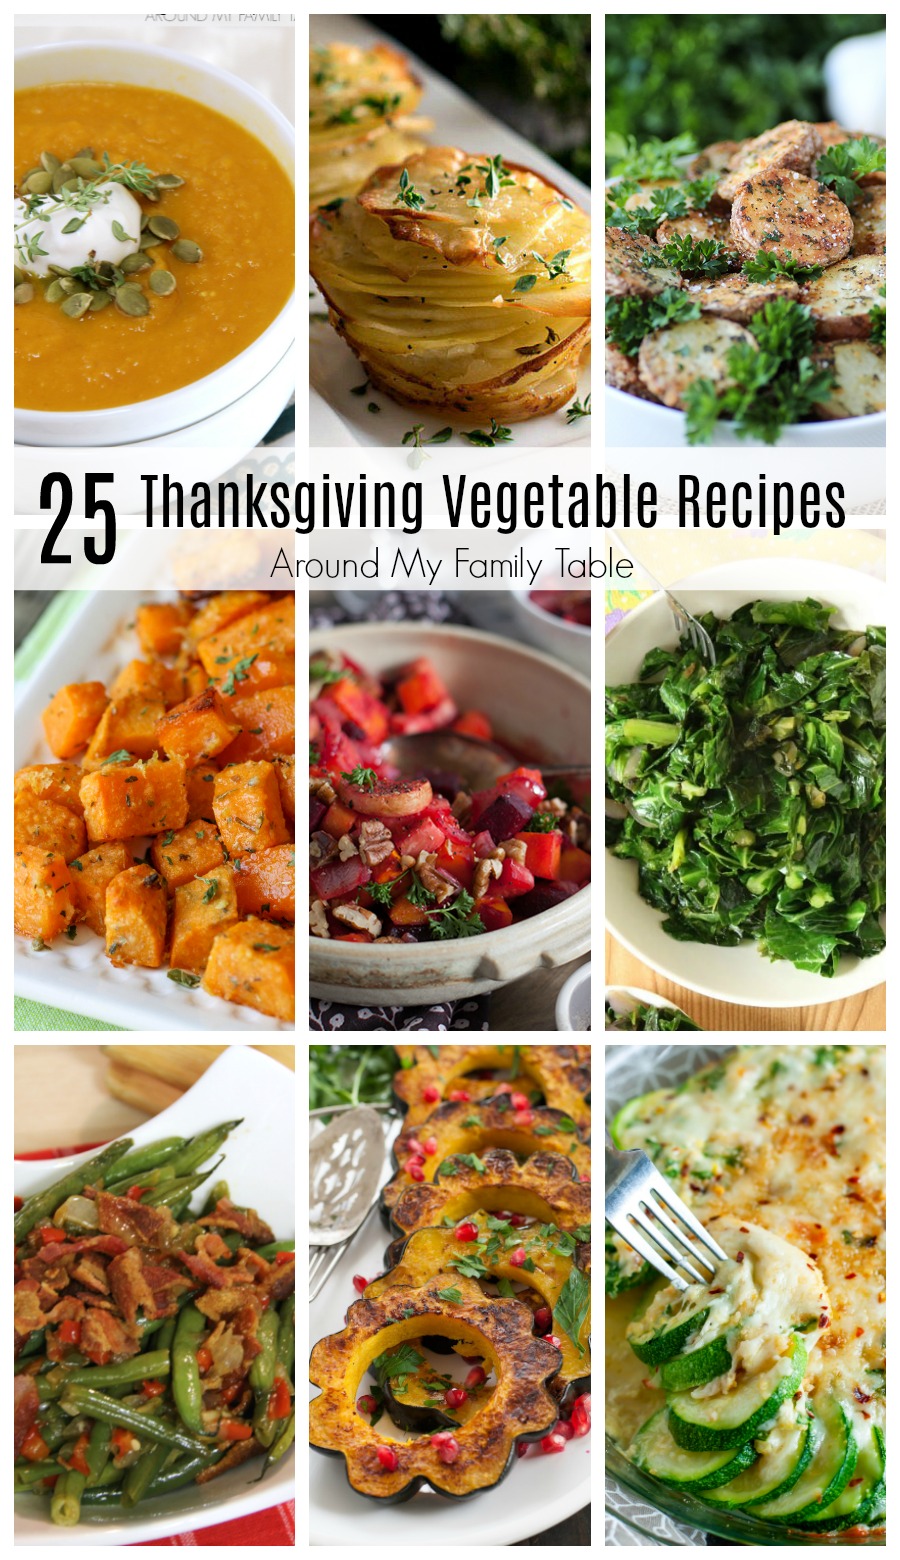 Set the perfect Thanksgiving table and be inspired with these delicious and beautiful Thanksgiving Vegetable Recipes and side dishes.